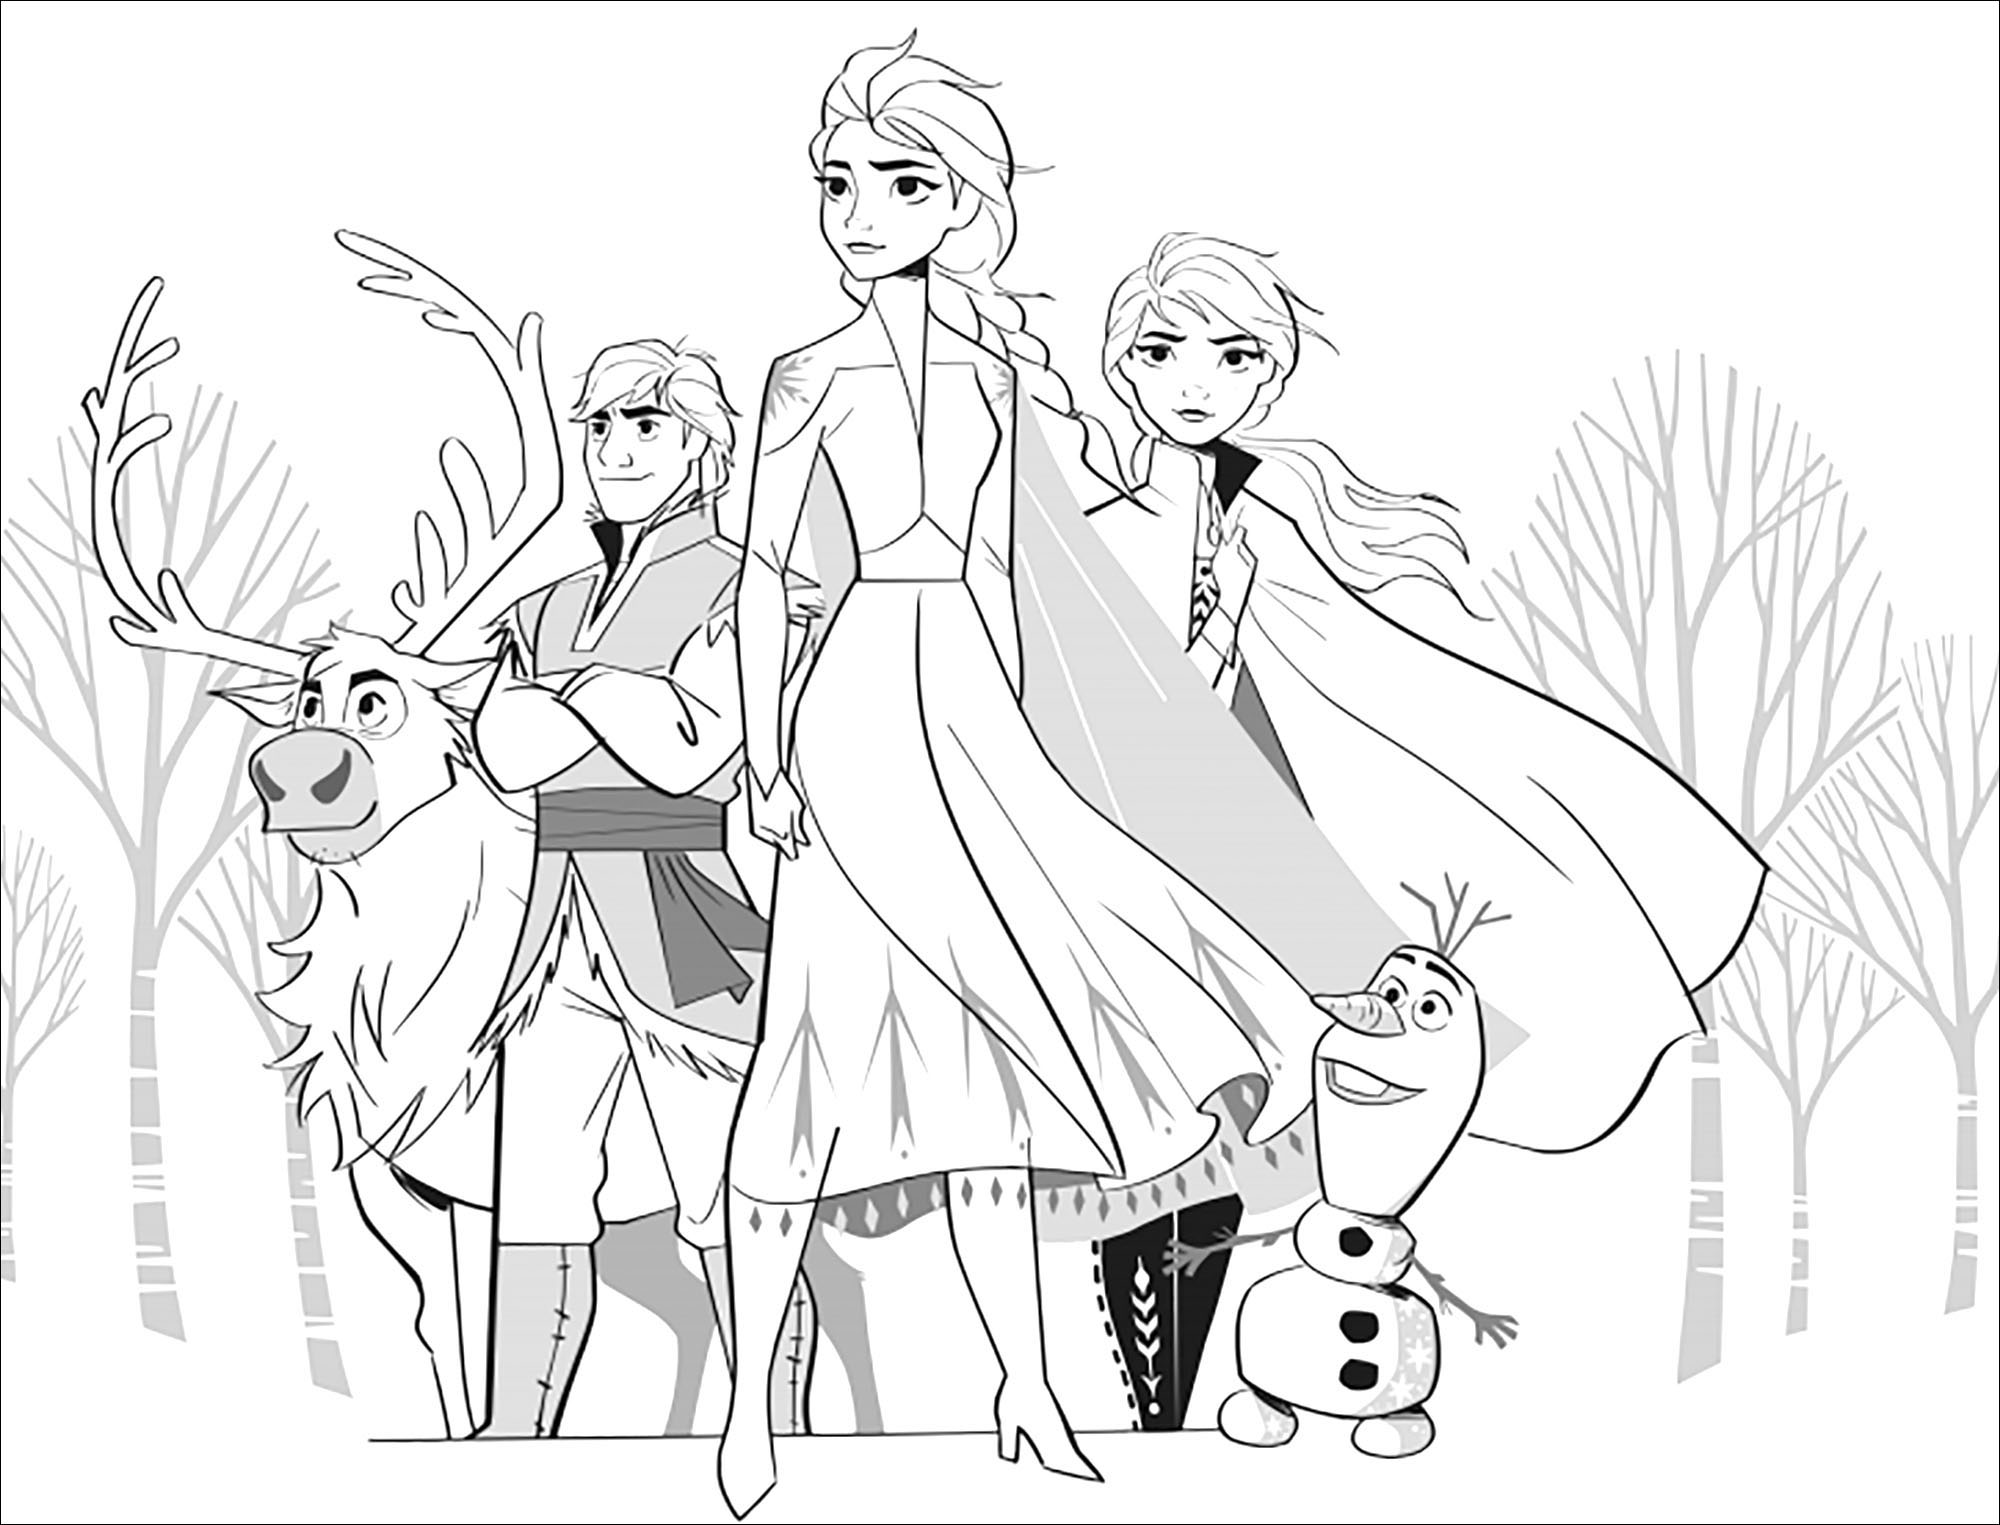 Download Frozen 2 : Elsa, Anna, Olaf, Sven, Kristoff without text ...